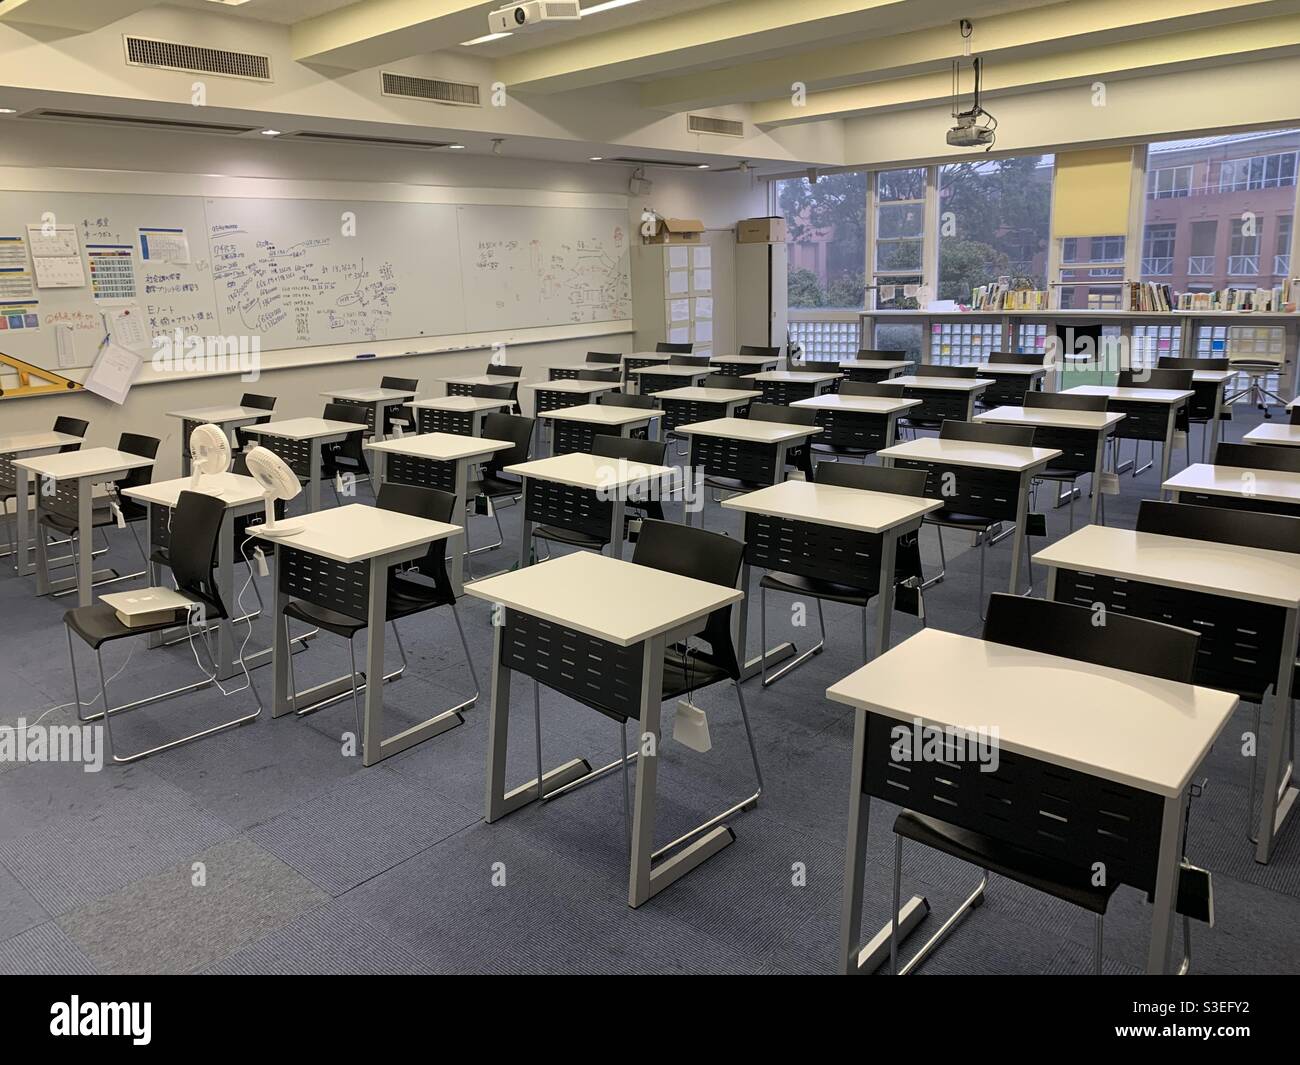 Interior Views Of An Empty Japanesestyle Classroom Stock Photo - Download  Image Now - iStock